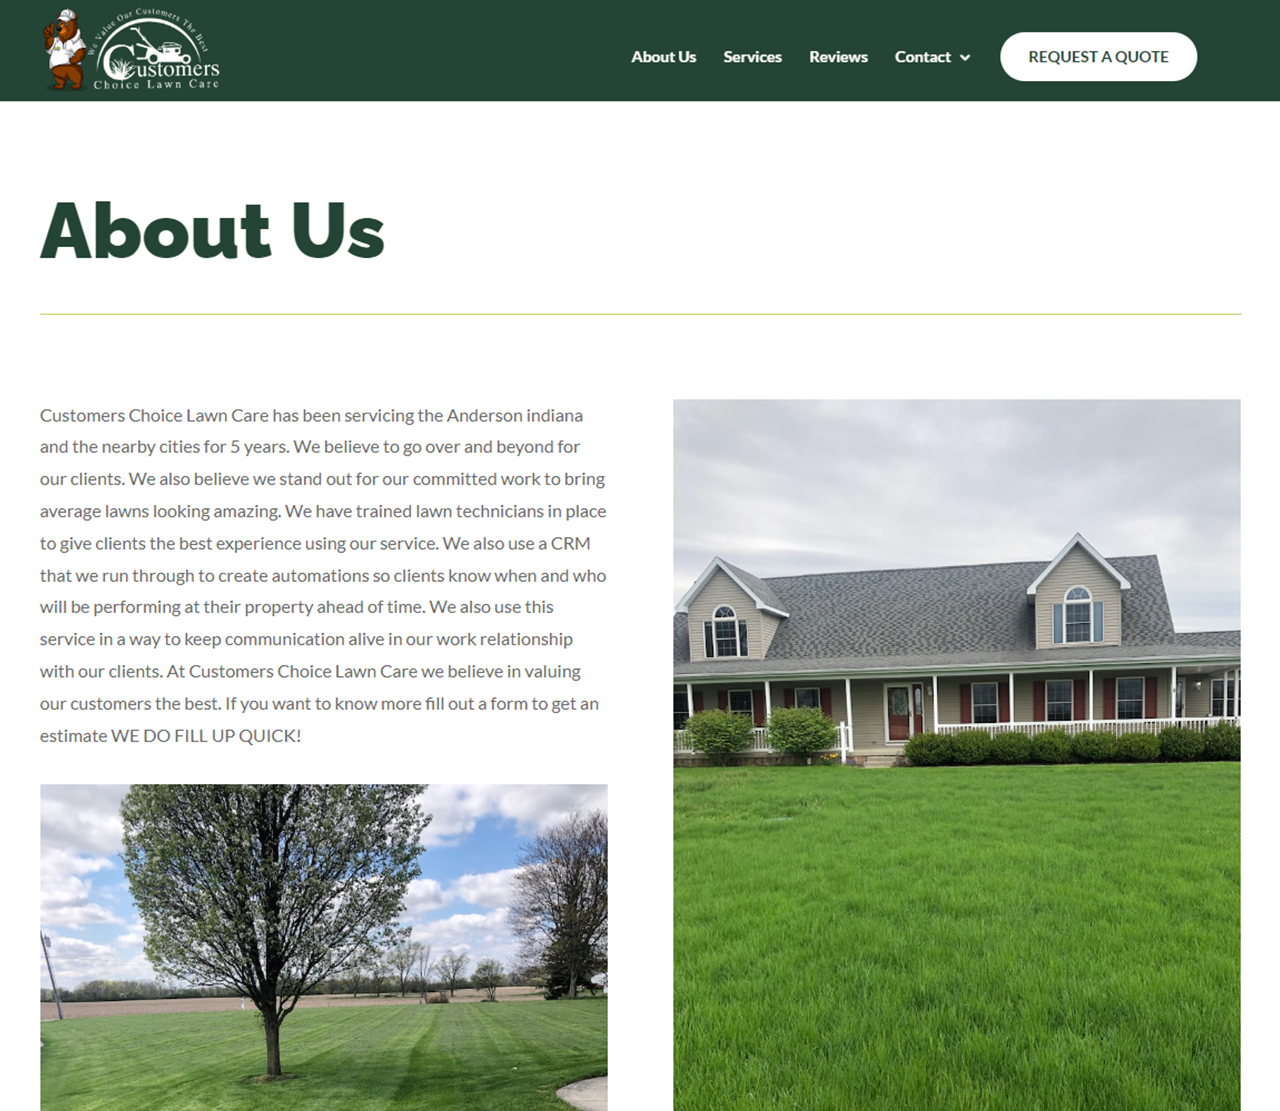 Customers Choice Lawn Care About Us Page